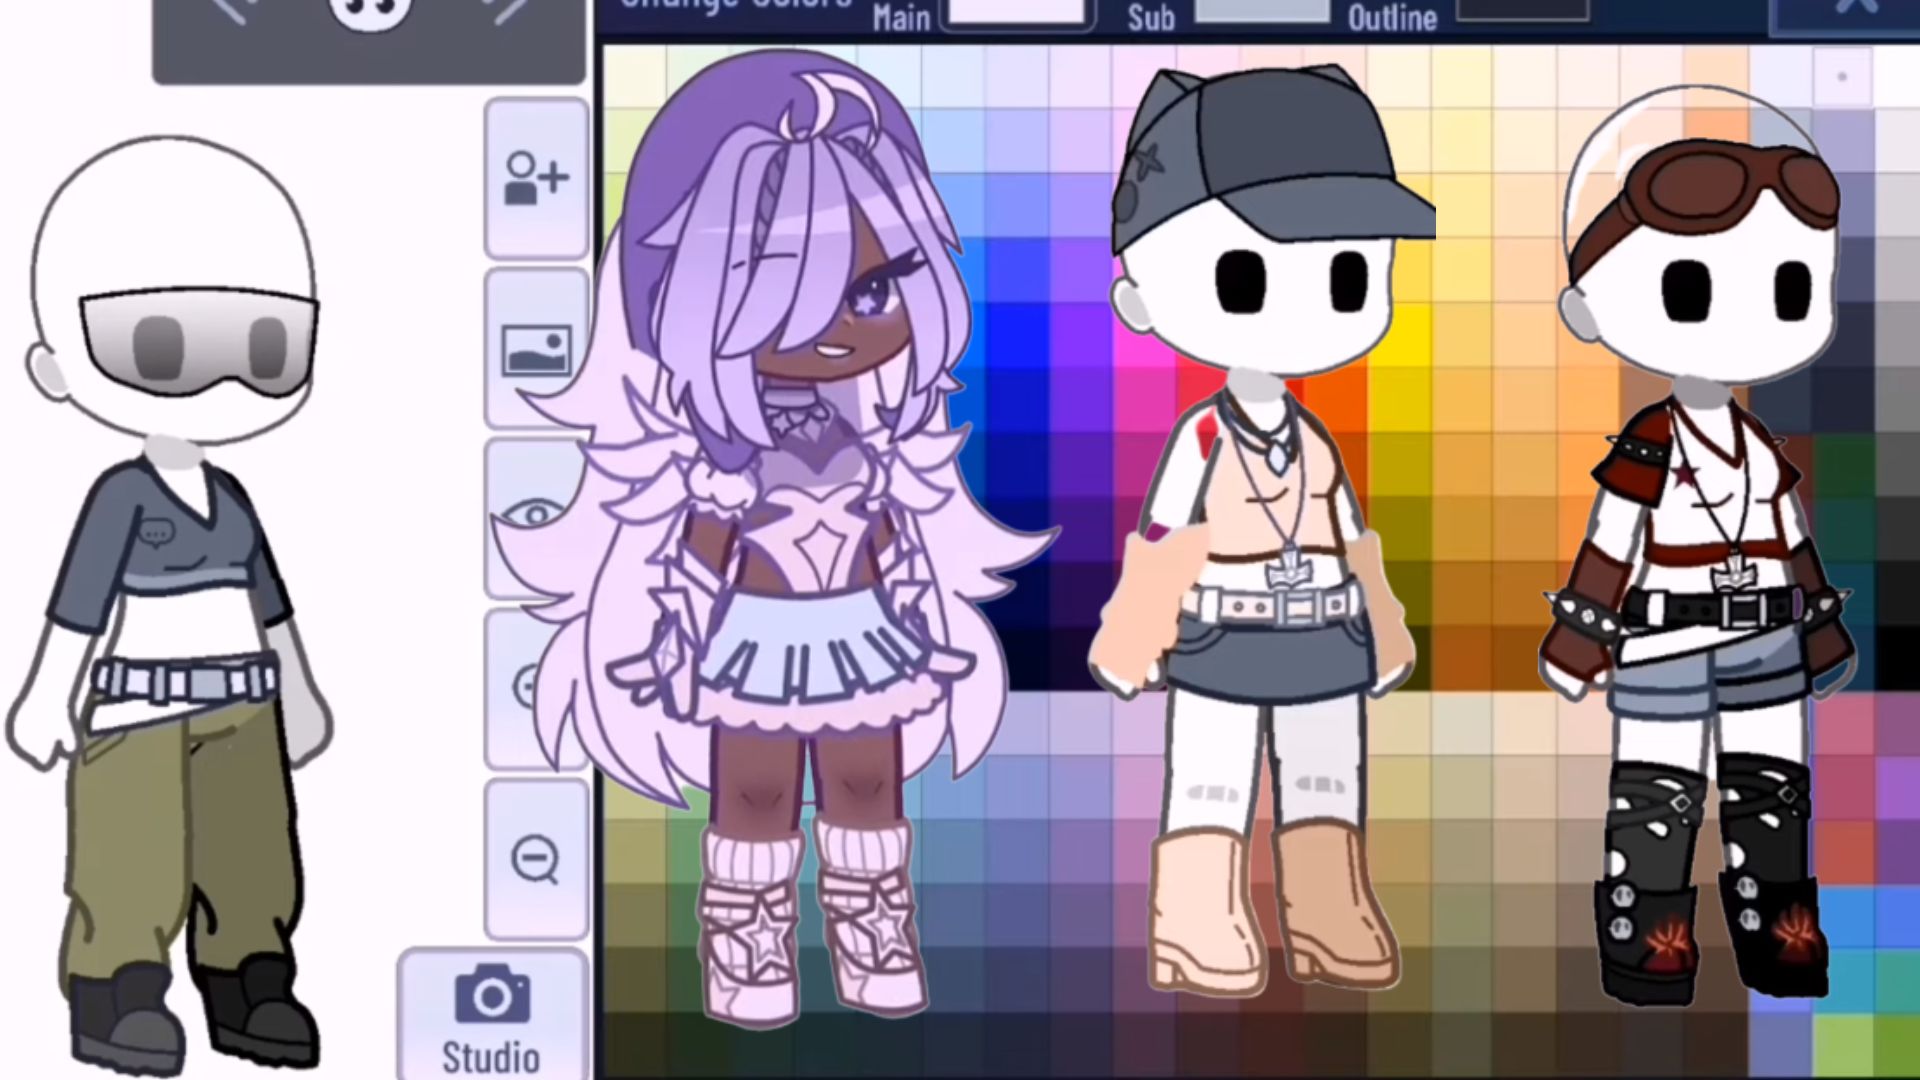 GAcha y2k's outfits